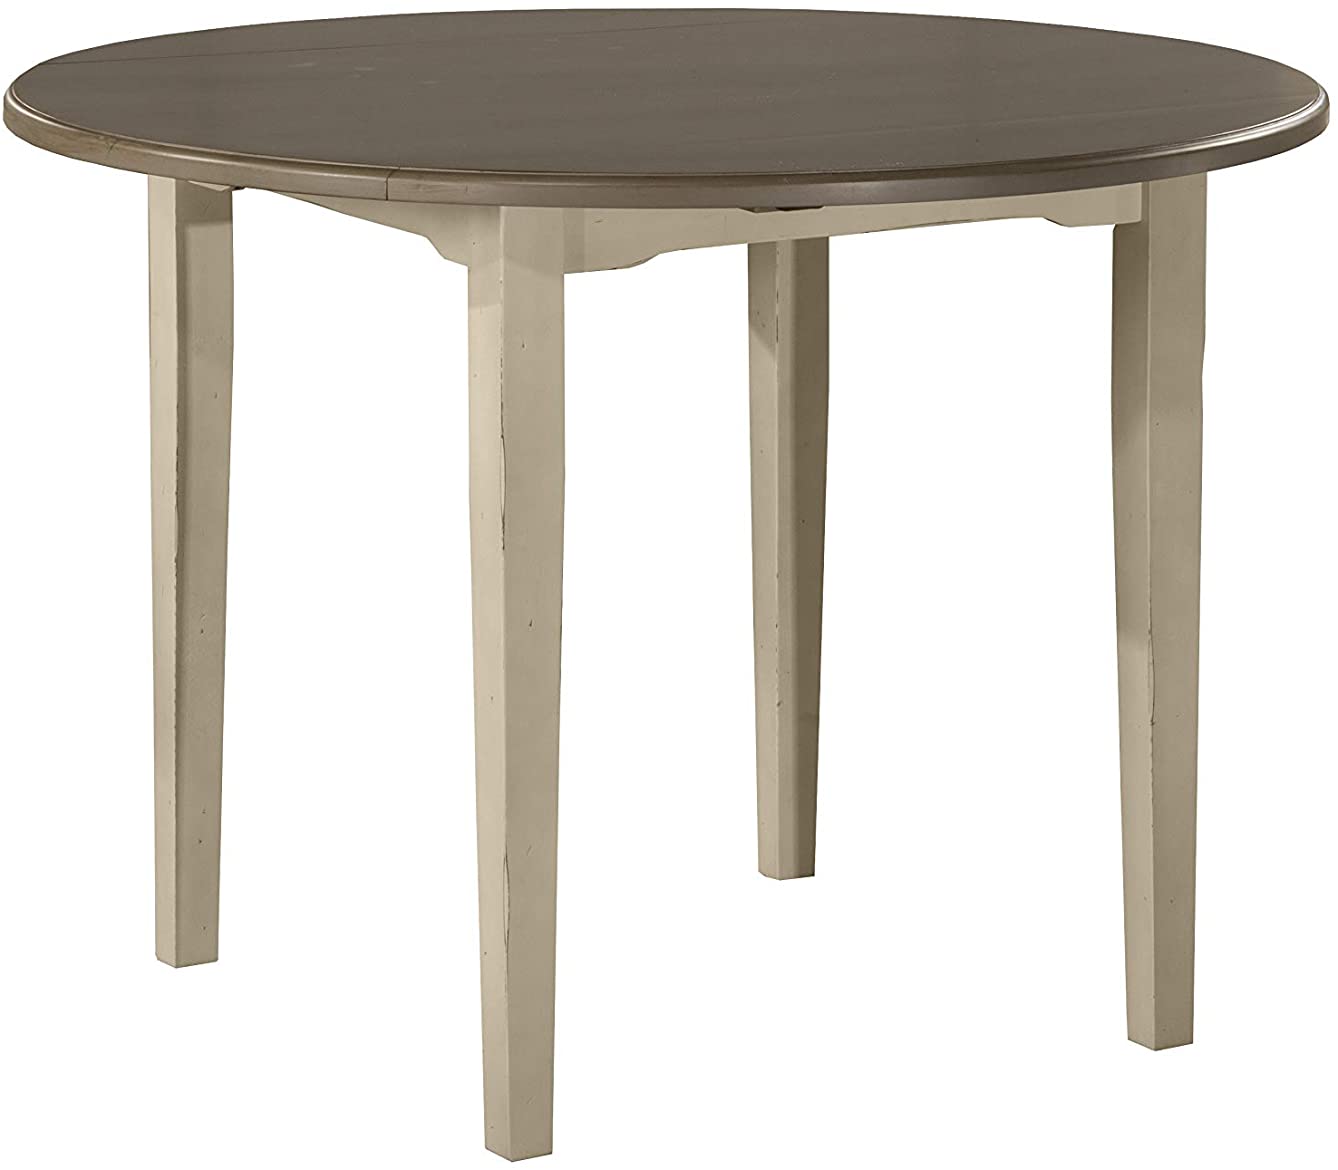 B075YTSDN4 Hillsdale Furniture Hillsdale Clarion Round Drop Leaf, Distressed Gray/Sea White Dining Table